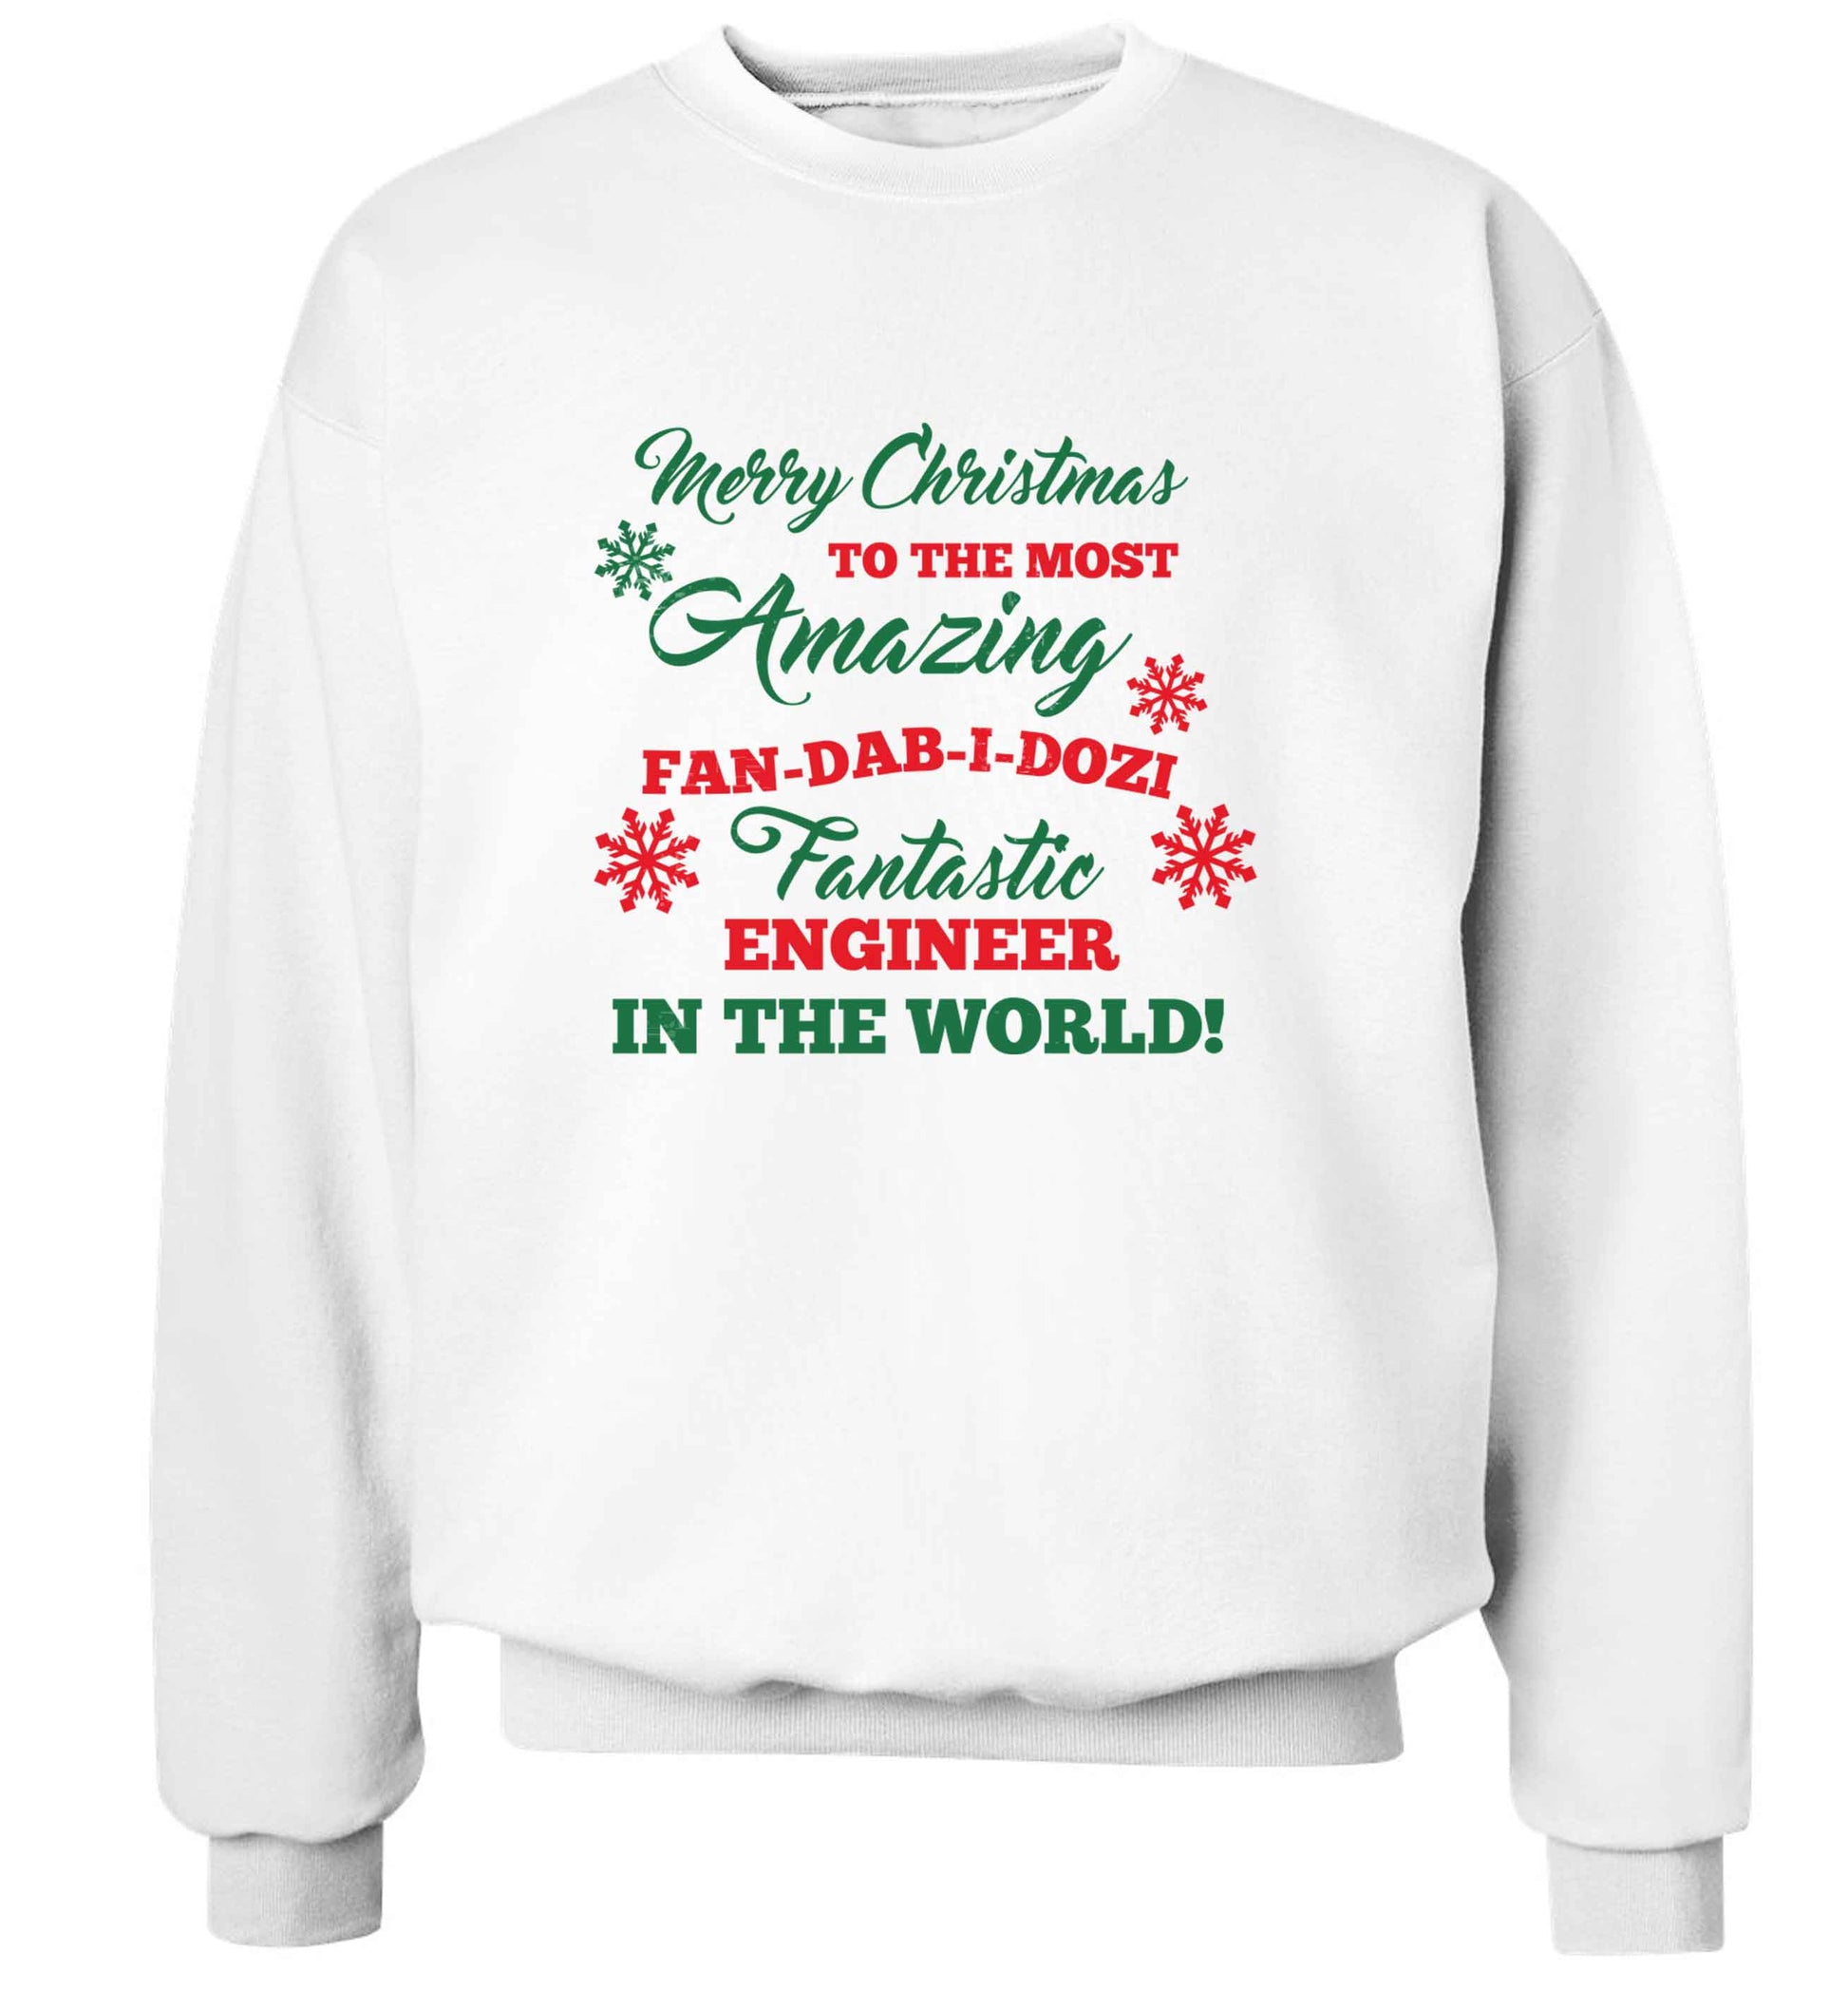 Merry Christmas to the most amazing engineer in the world! adult's unisex white sweater 2XL